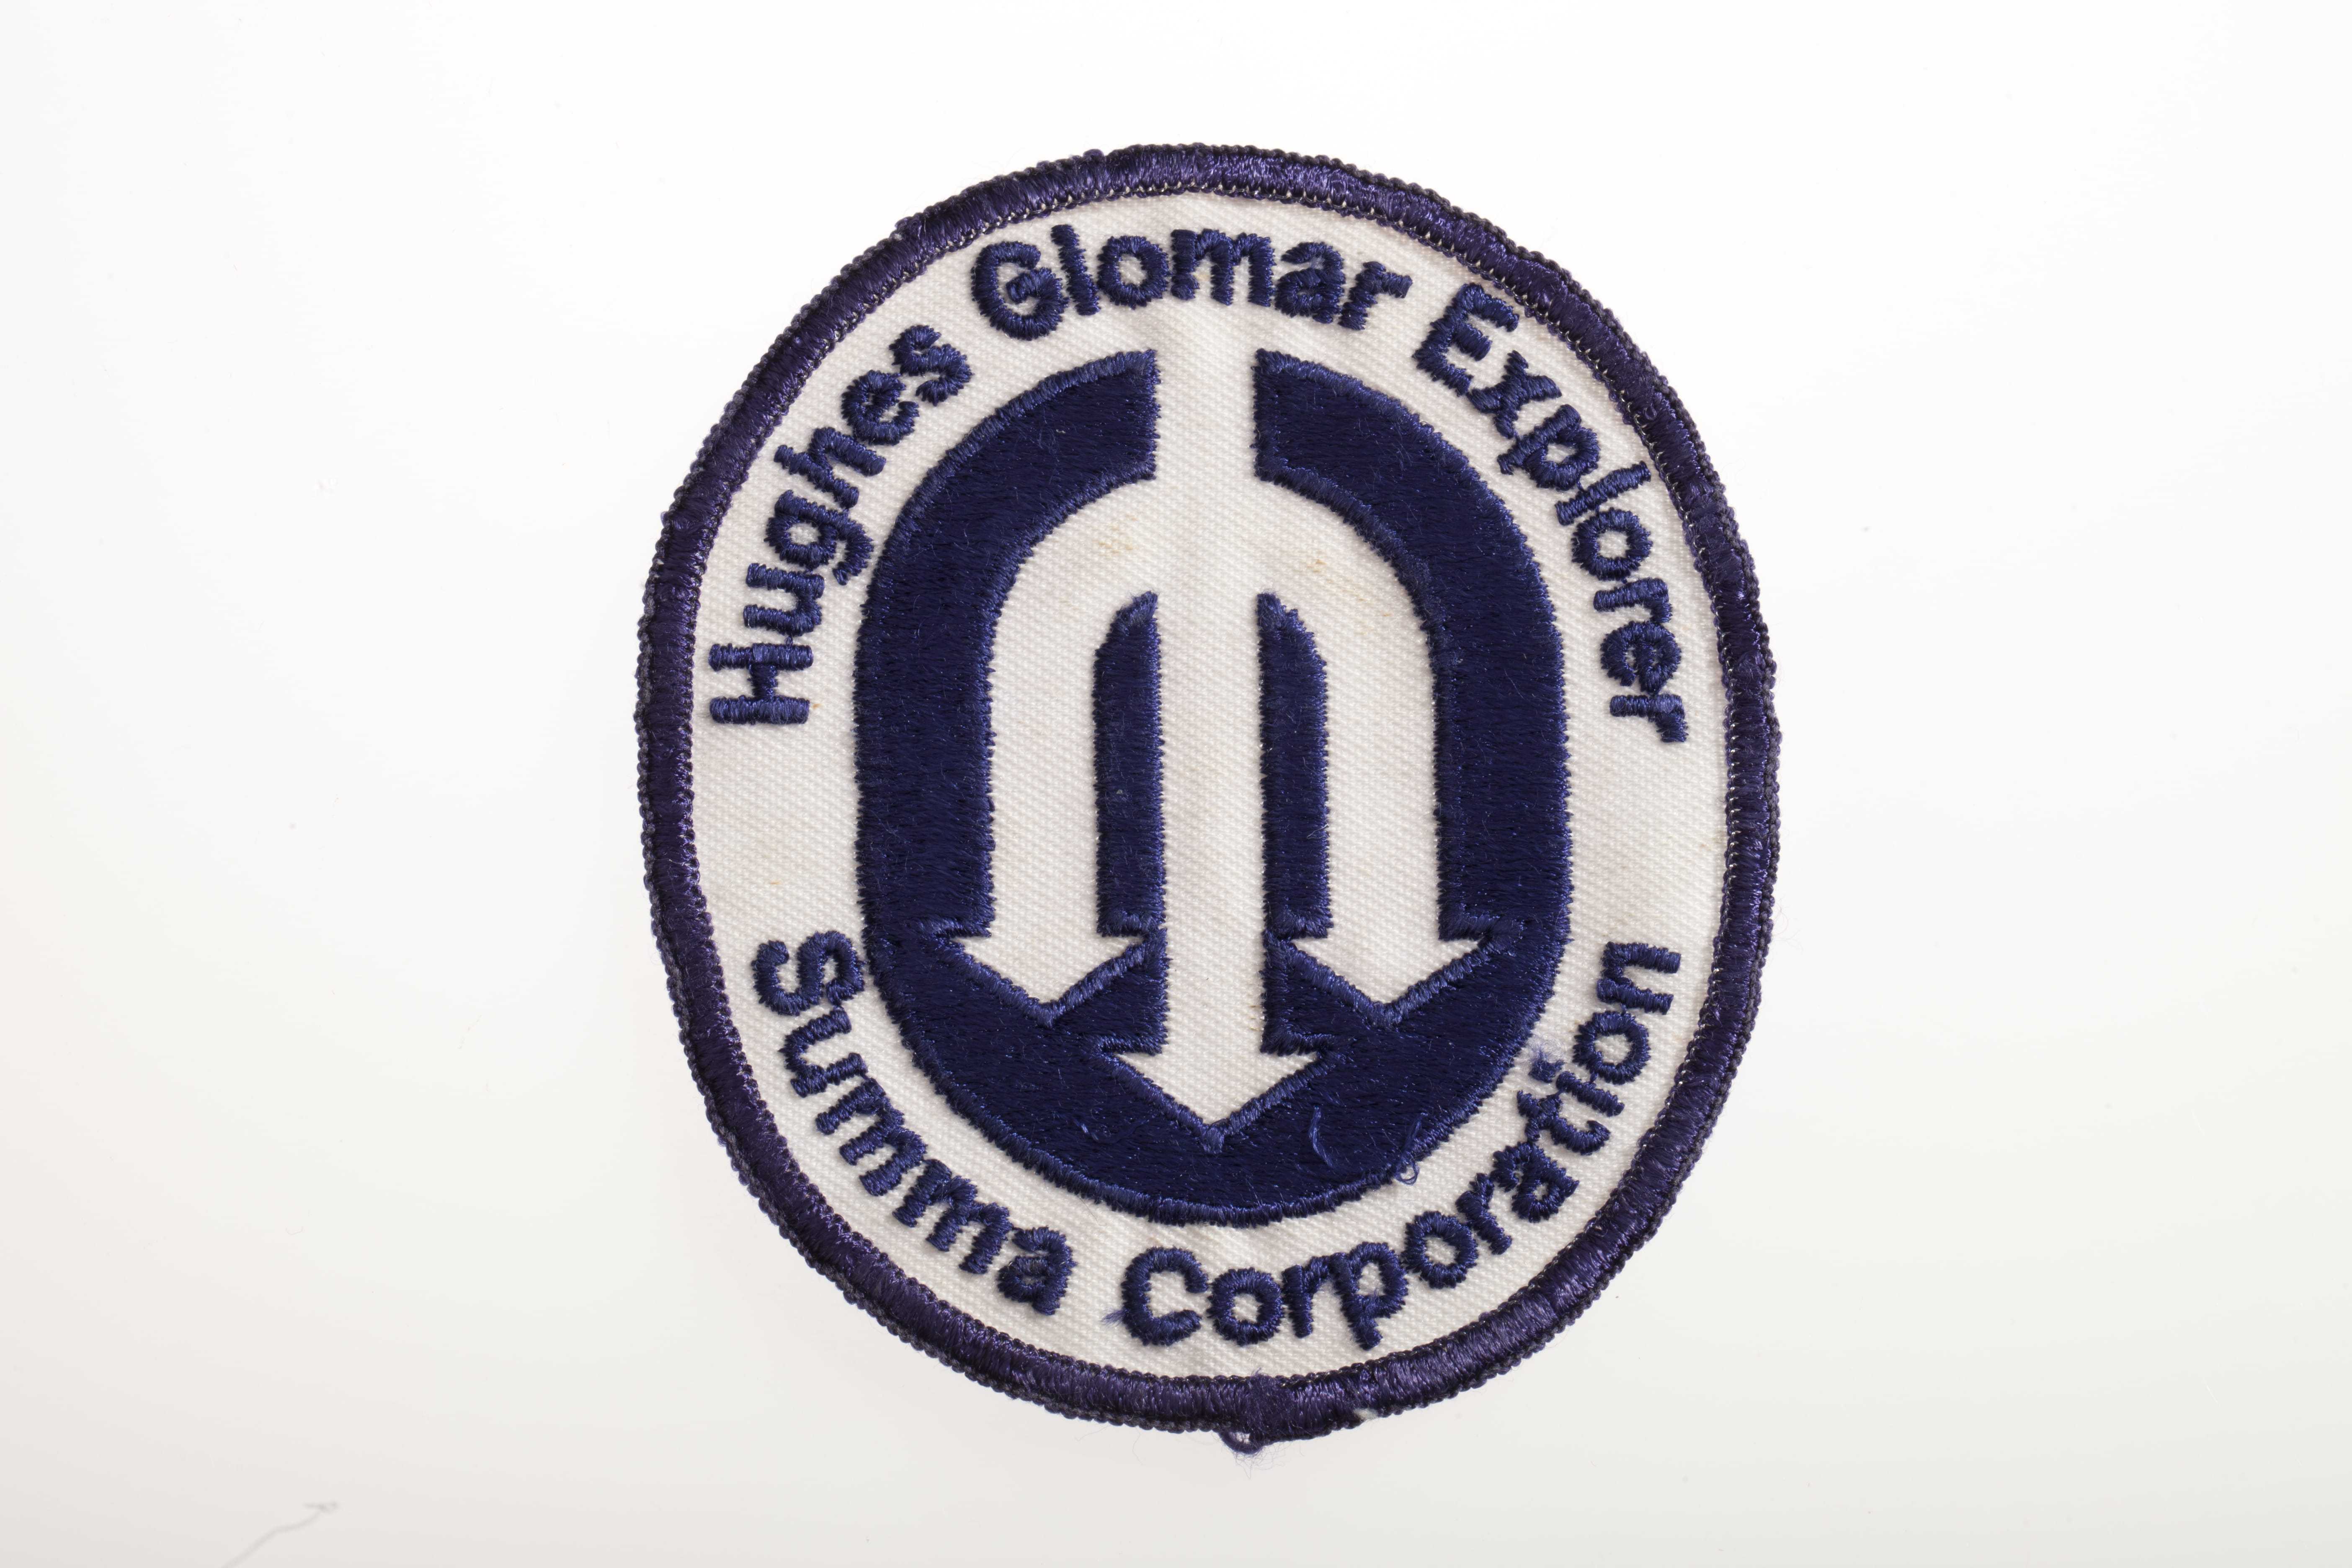 A patch with three divergent arrows pointing down and the words "Hughes Glomar Explorer Summa Corporation."